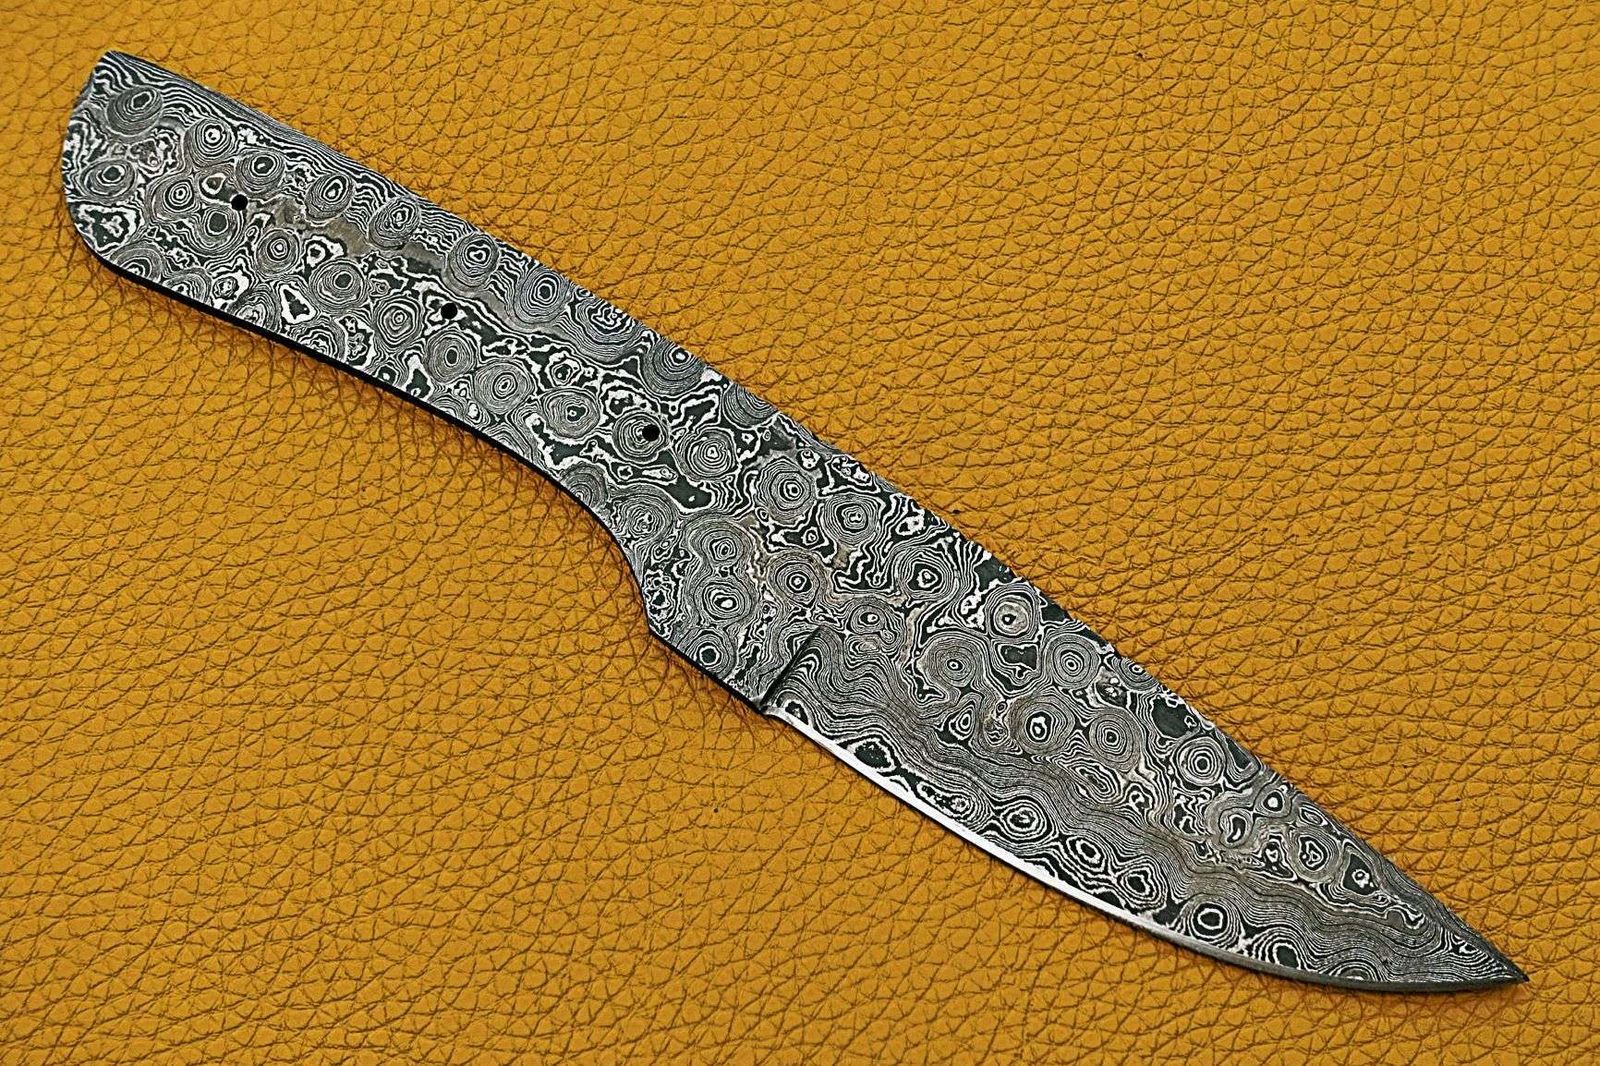 10.5 inches Long Damascus Steel Nessmuk Blade Skinning Knife, Knife Making  Supplies, Hand Forged rain Drop Pattern Damascus Steel Blank Blade Hunting  Knife, 5.25 Cutting Edge, 4.5 Scale Space - Damacus Depot, Inc.